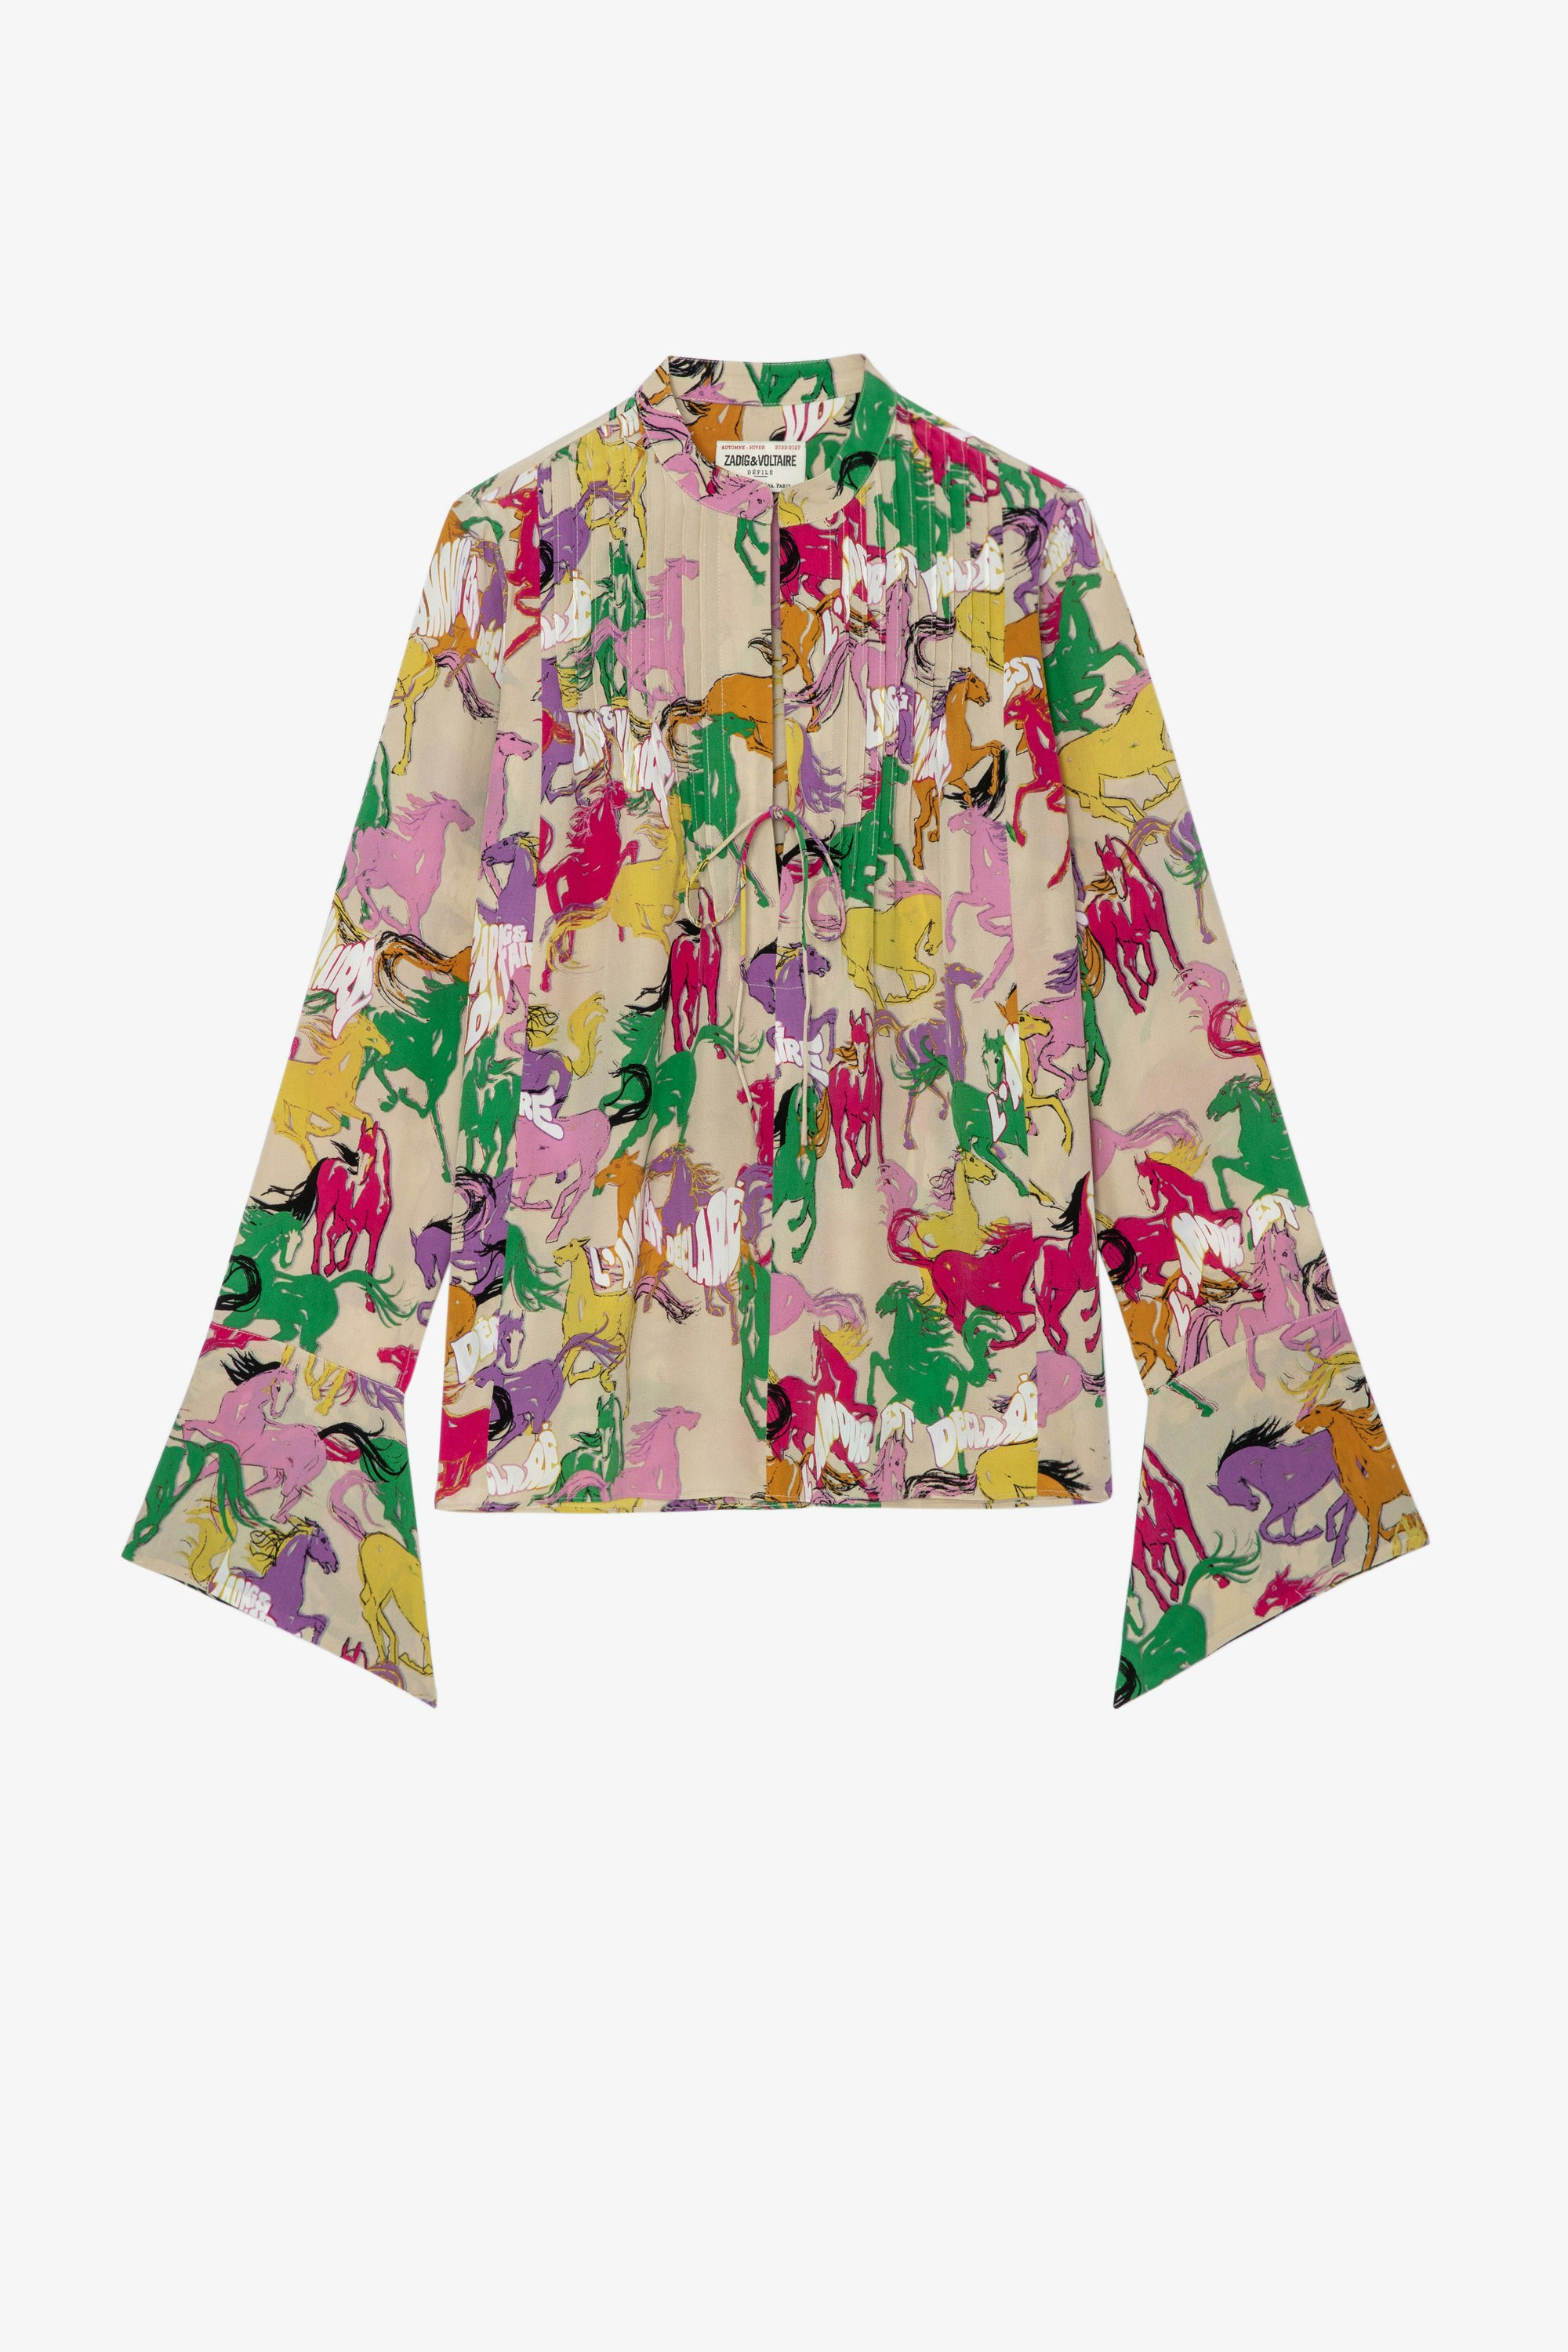 Taika Horses Diamanté シルク シャツ Women’s ecru silk shirt with draped sleeves, decorated with a multicoloured horse print 